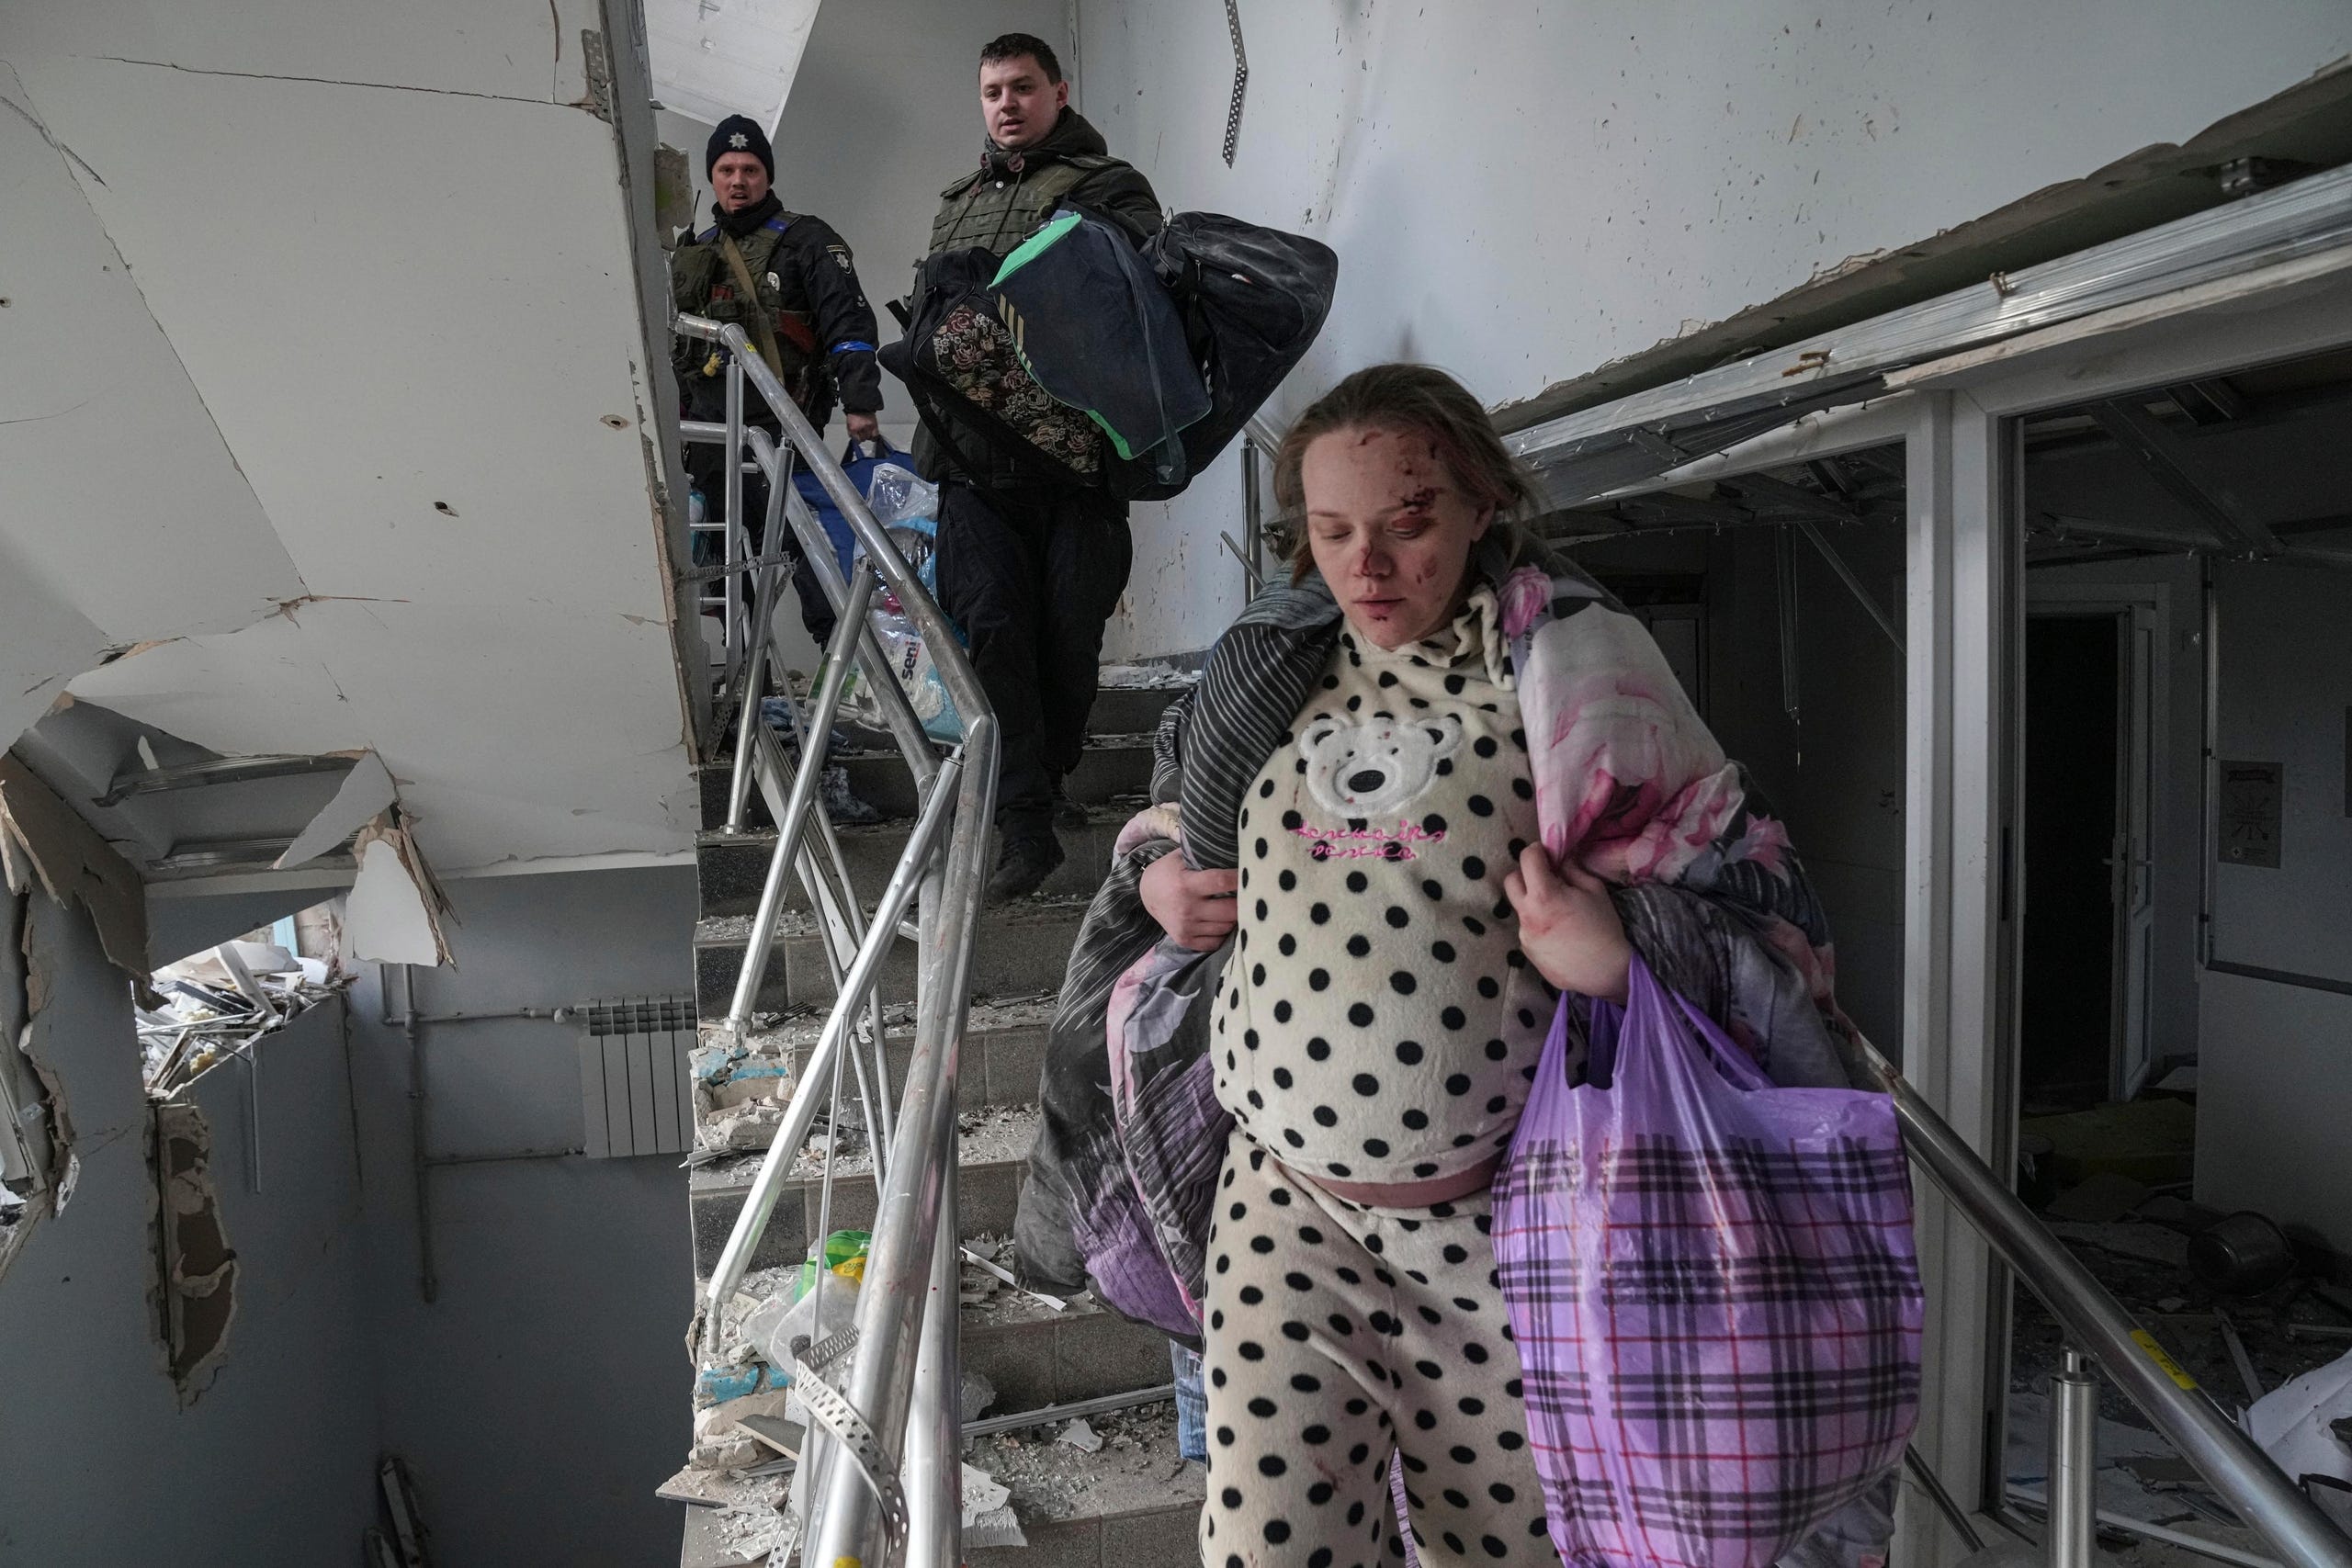 An injured pregnant woman walks downstairs in a maternity hospital damaged by shelling in Mariupol, Ukraine, Wednesday, March 9, 2022. (AP Photo/Evgeniy Maloletka) ORG XMIT: NYAG513